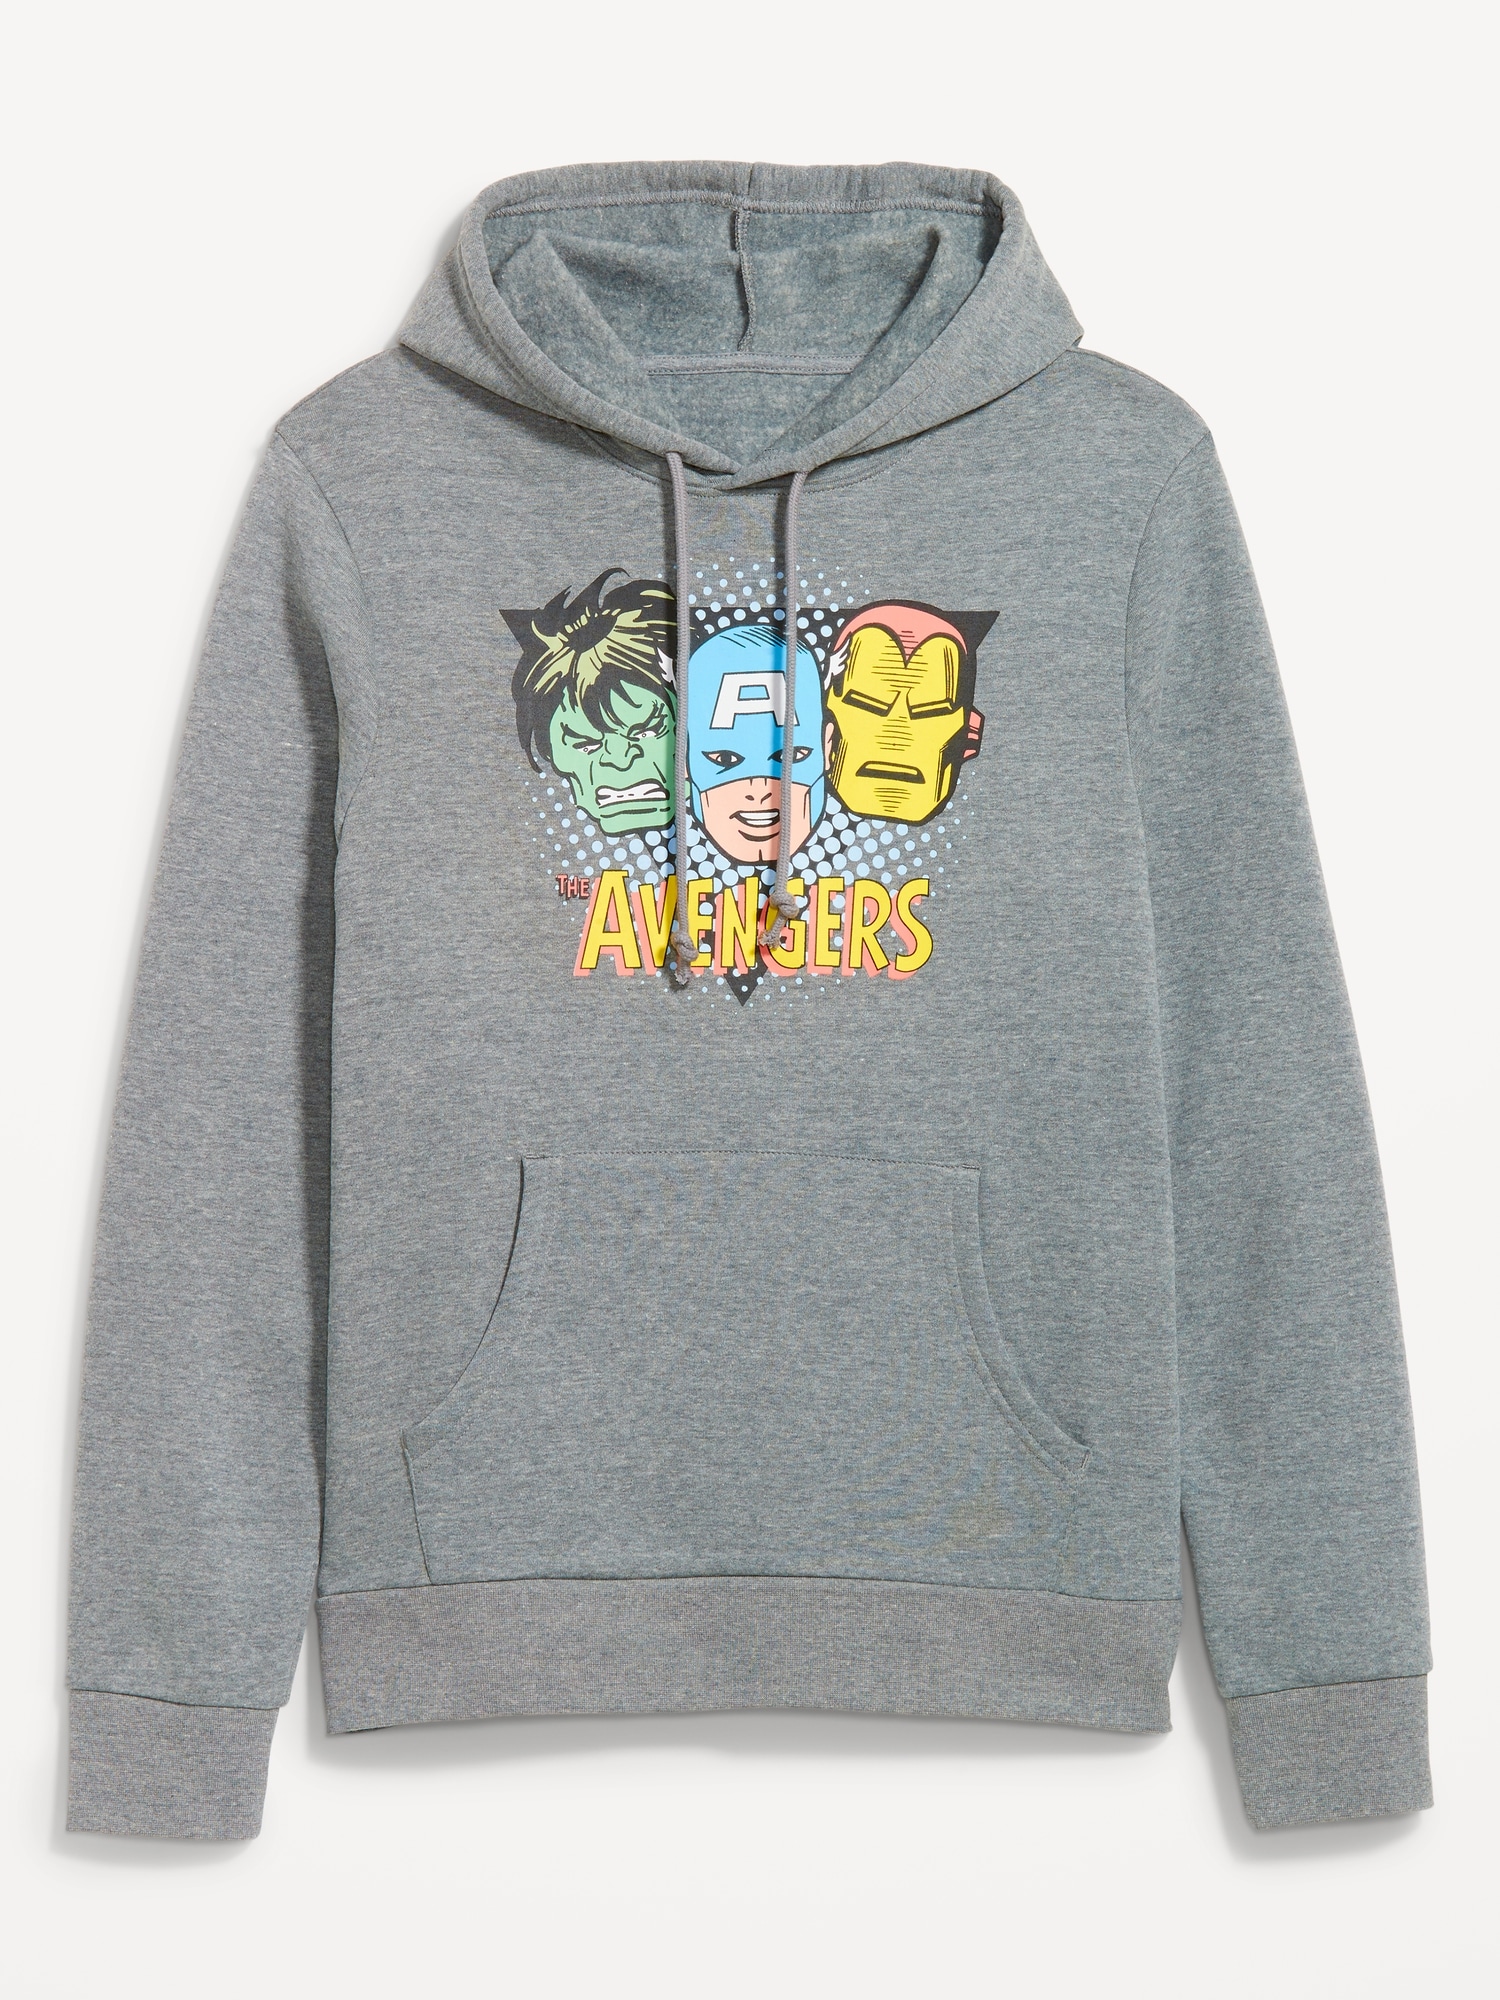 Marvel Avengers Gender-Neutral Hoodie for Adults